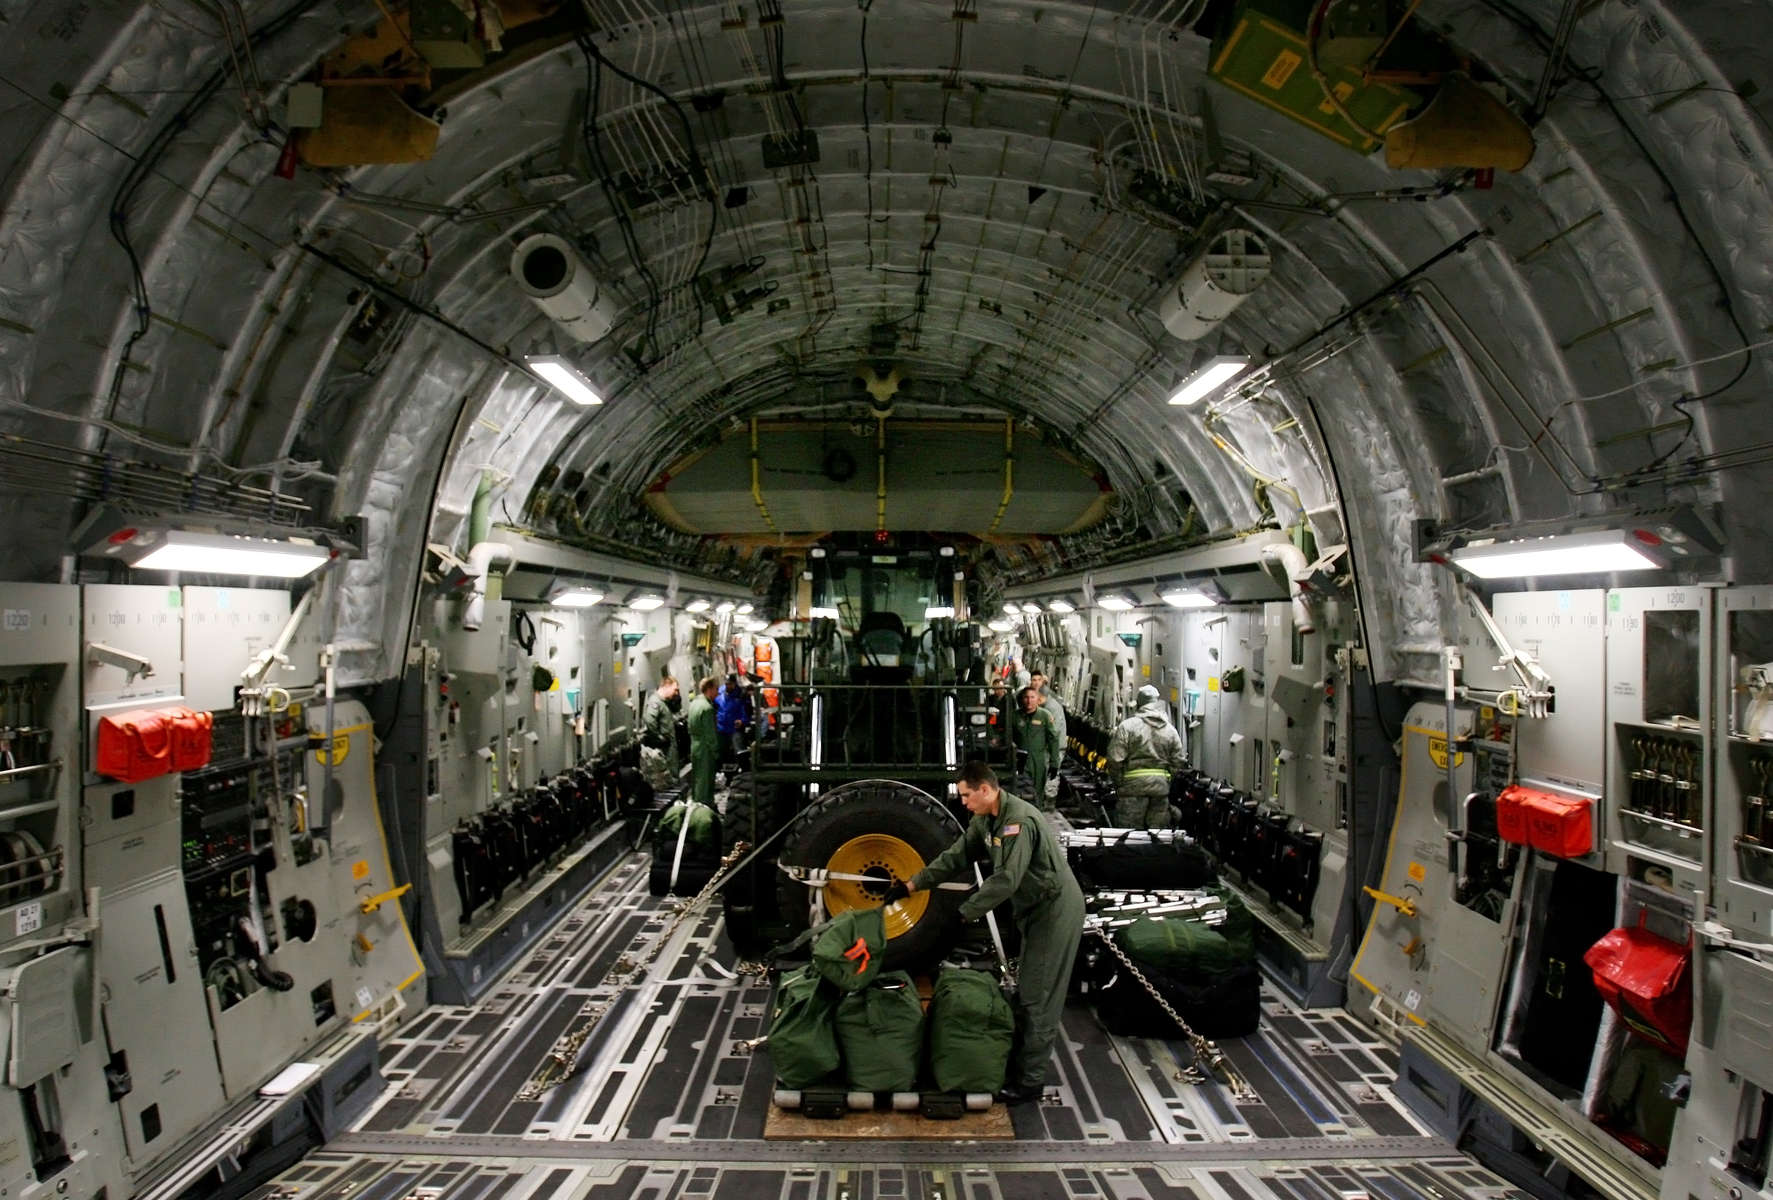 March Air Reserve Base C-17 aircrew Master Sgt. James ties down suppies in the cargo bay of the C-17 at McChord Air Force Base in Wash. (The Press-Enterprise/ Mark Zaleski)